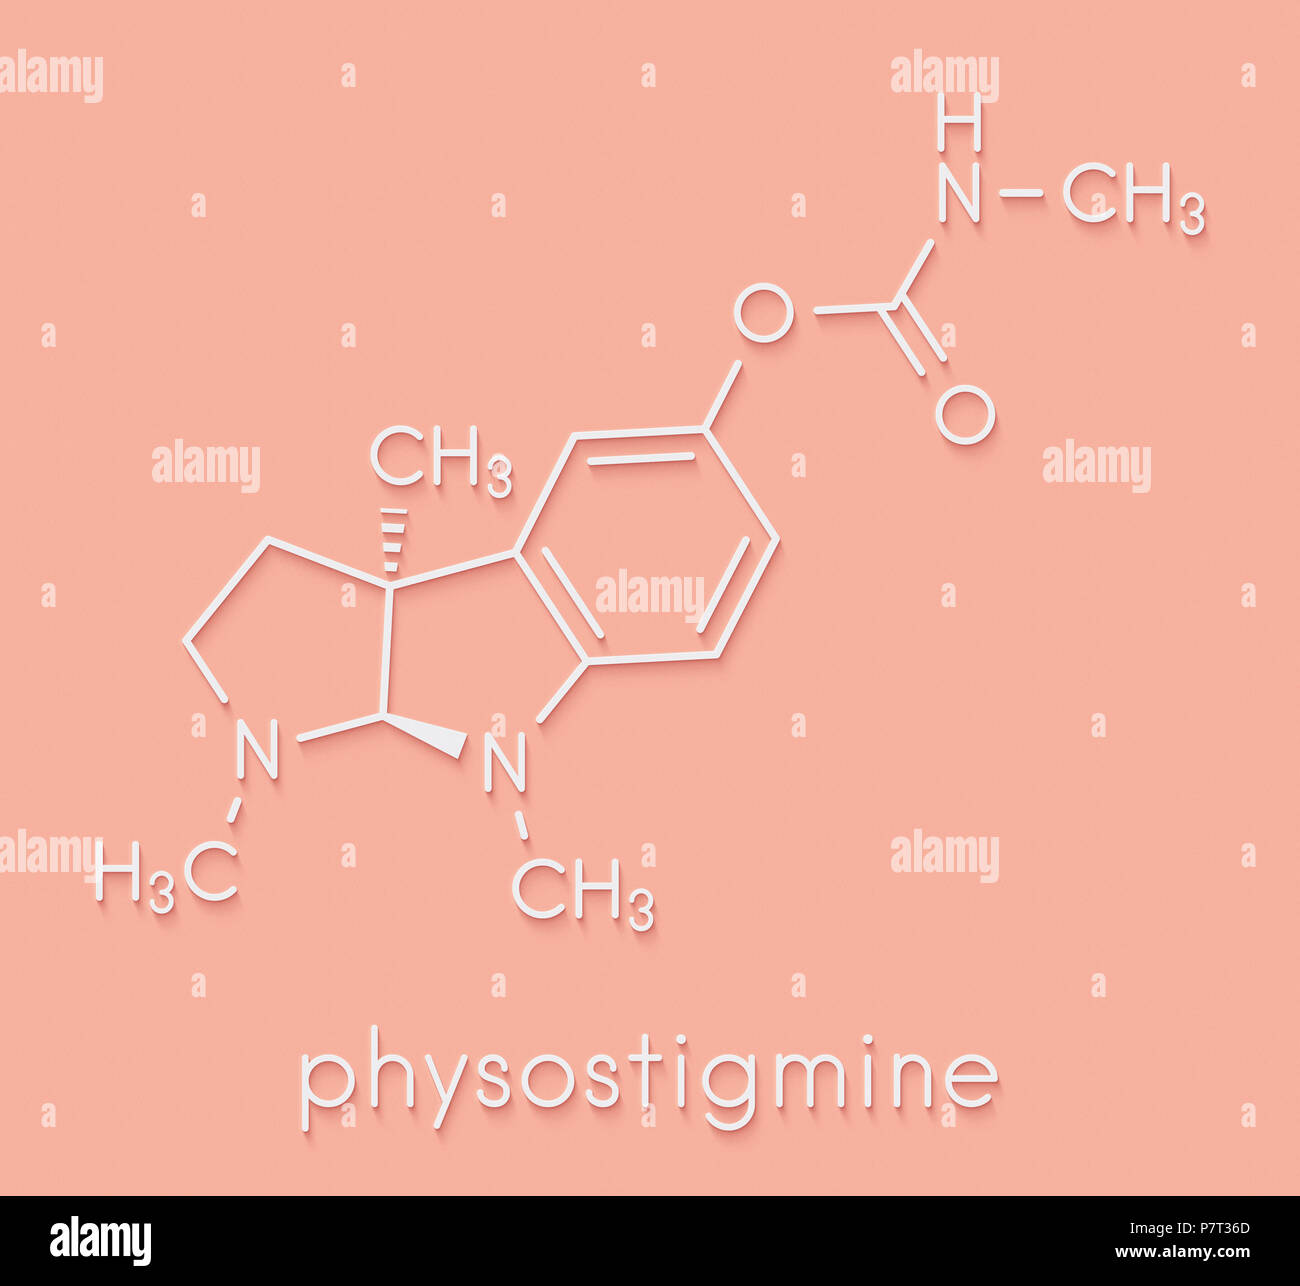 Physostigmine alkaloid molecule. Present in calabar bean and manchineel tree, acts as acetylcholinesterase inhibitor. Skeletal formula. Stock Photo